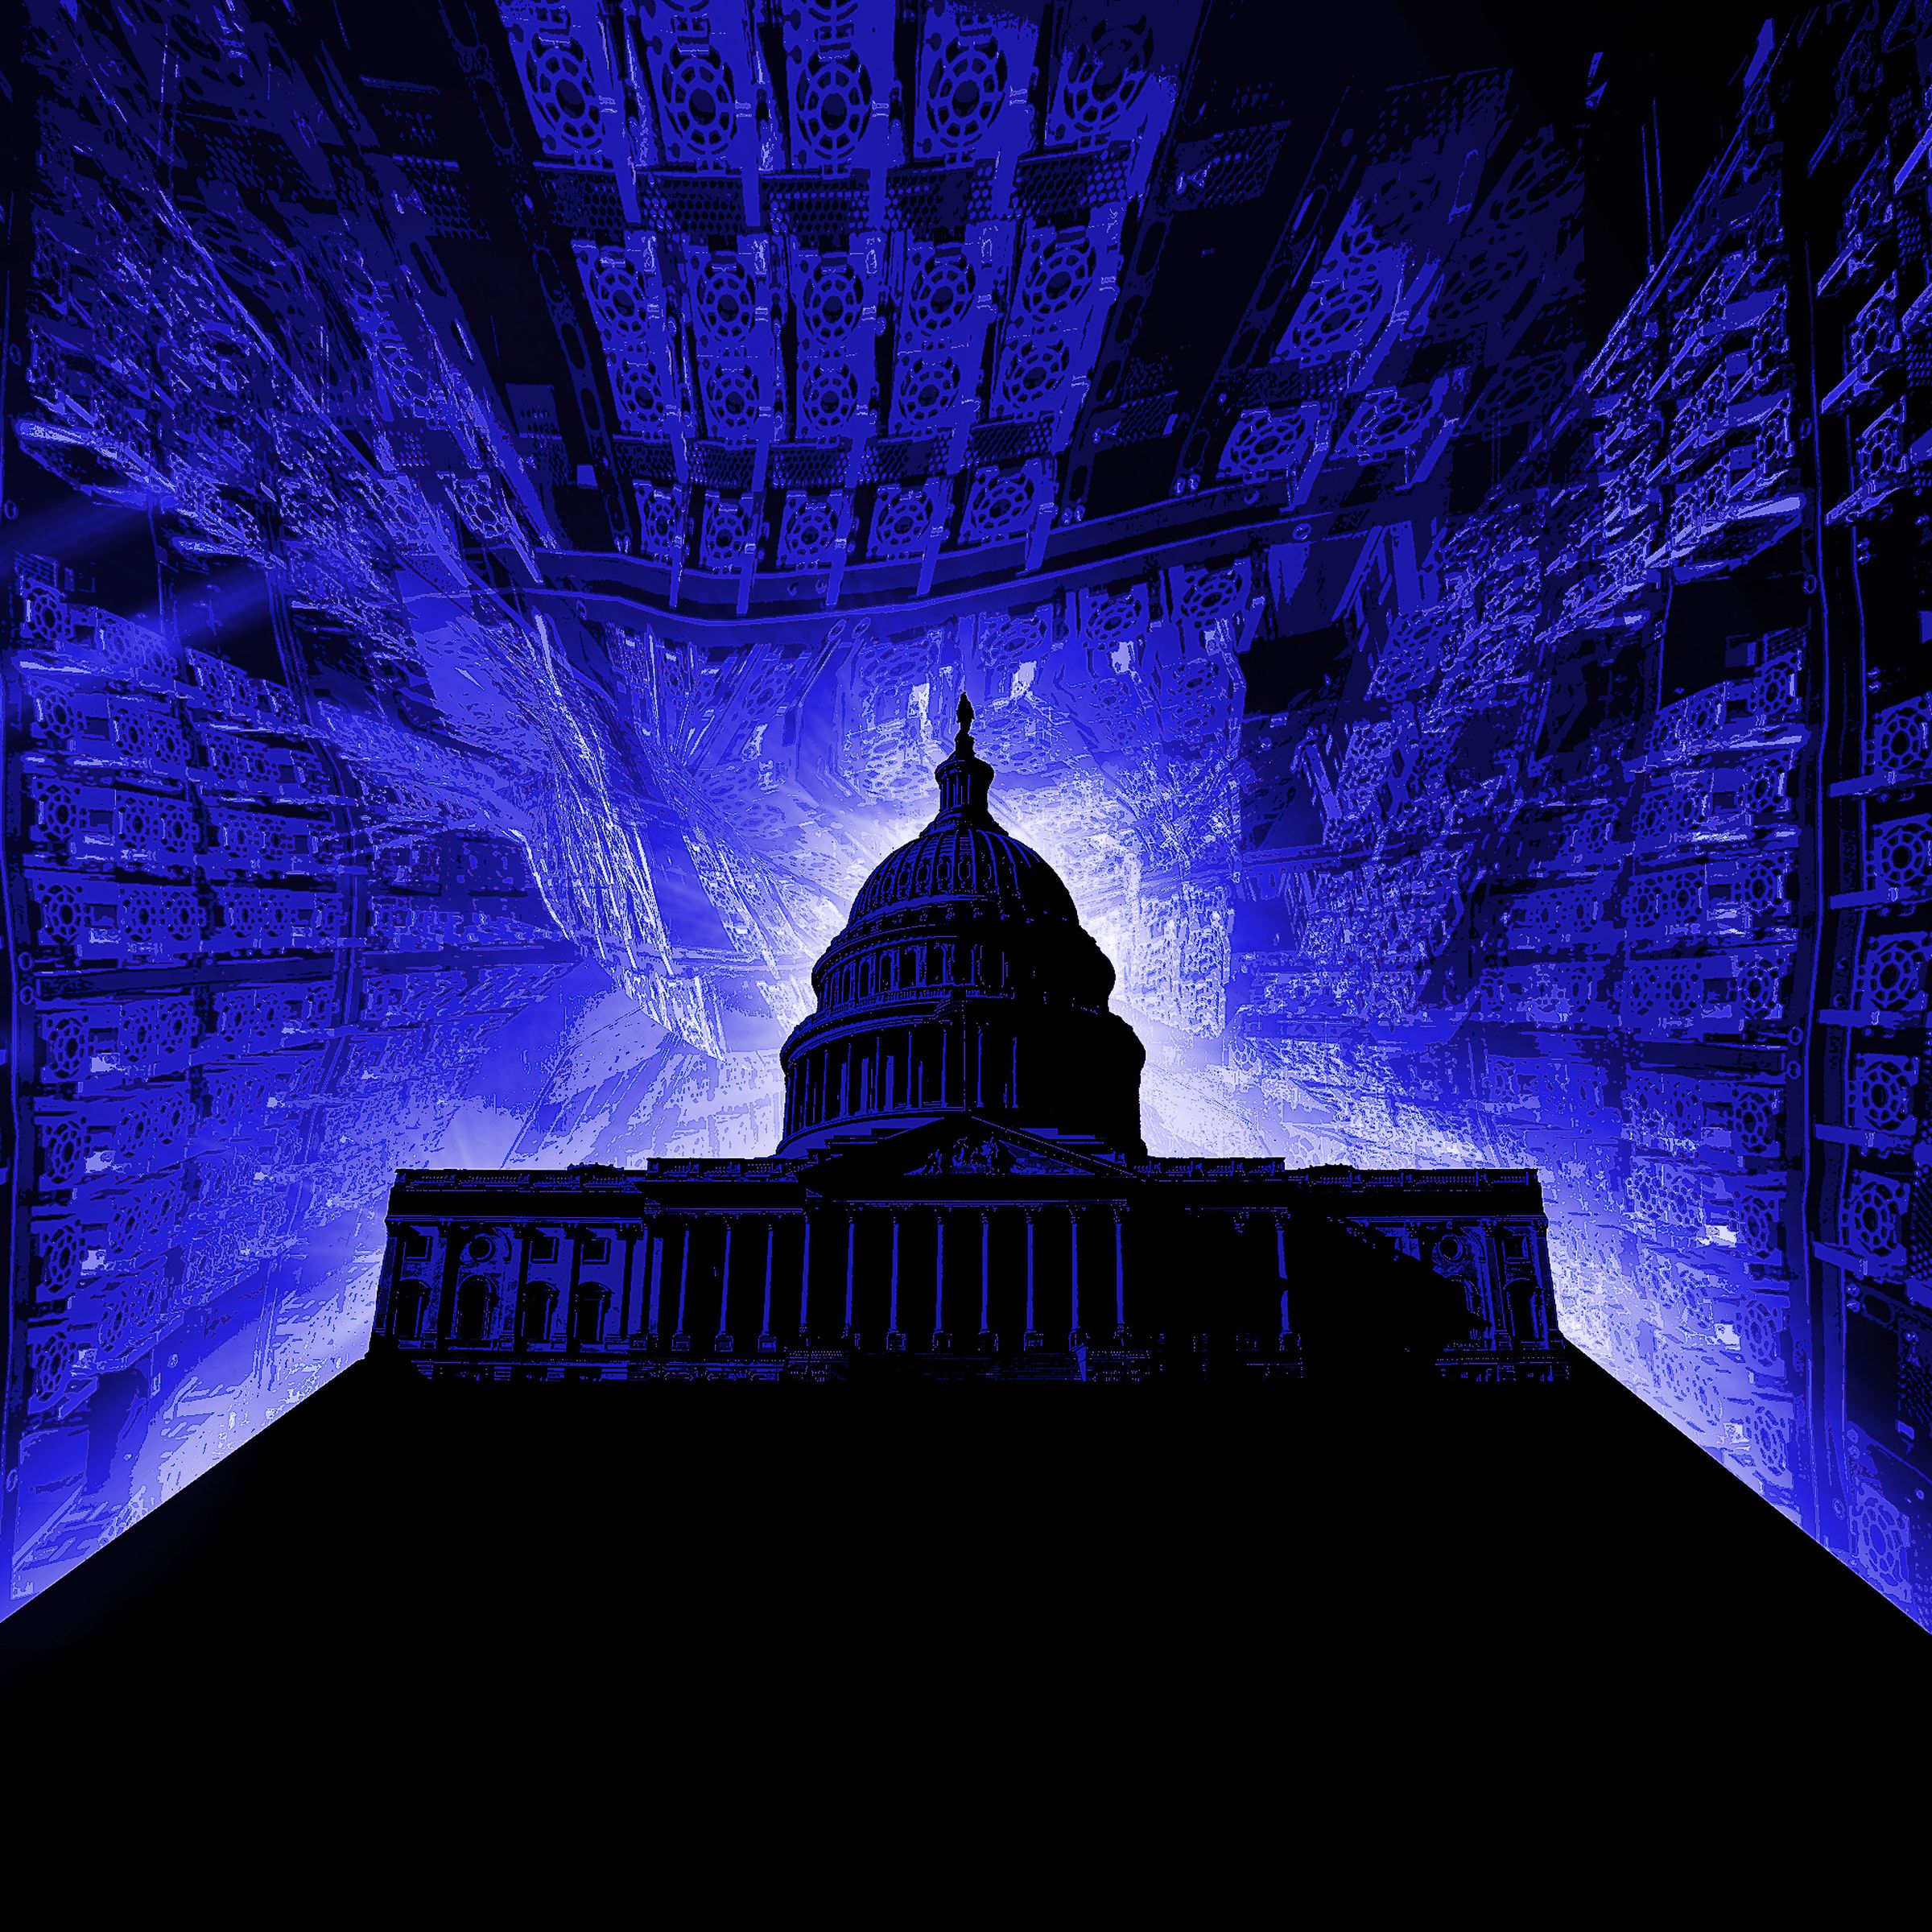 Illustration of the Capitol building with a blue filter.